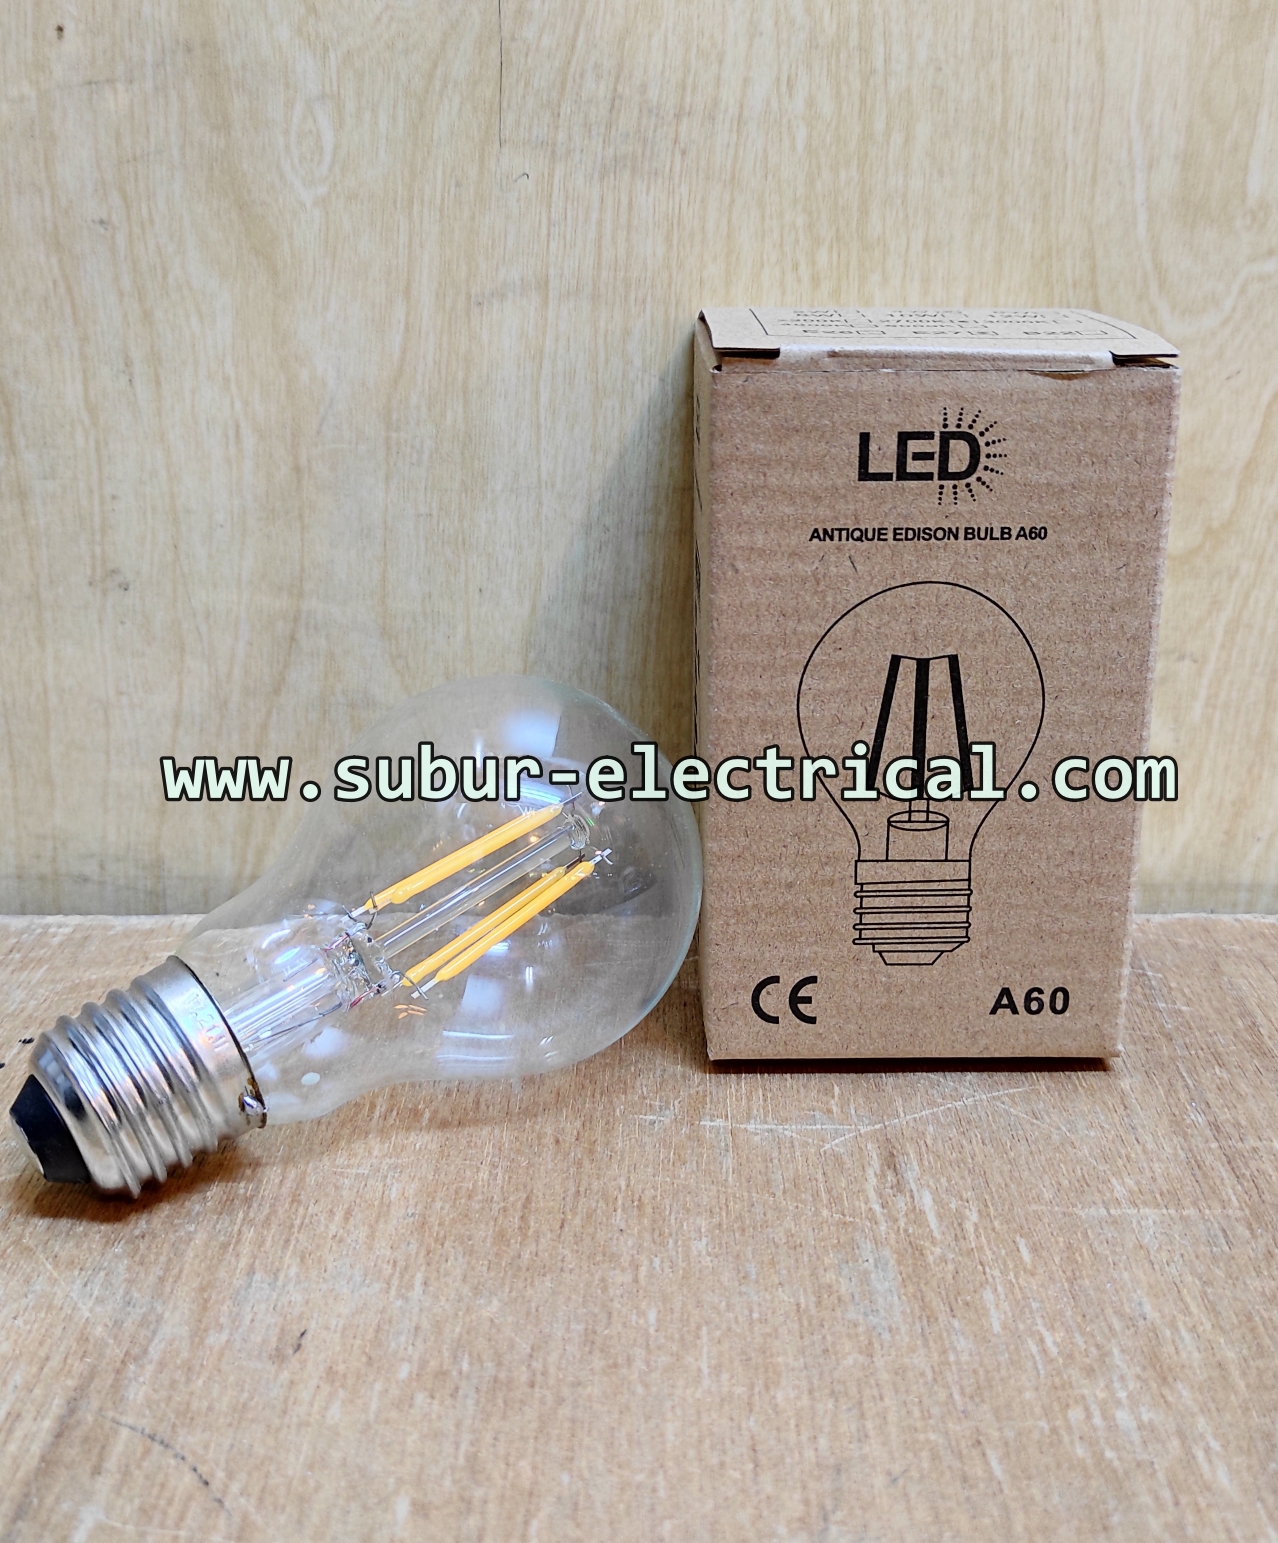 Dimmable LED classic 4W A60 E27